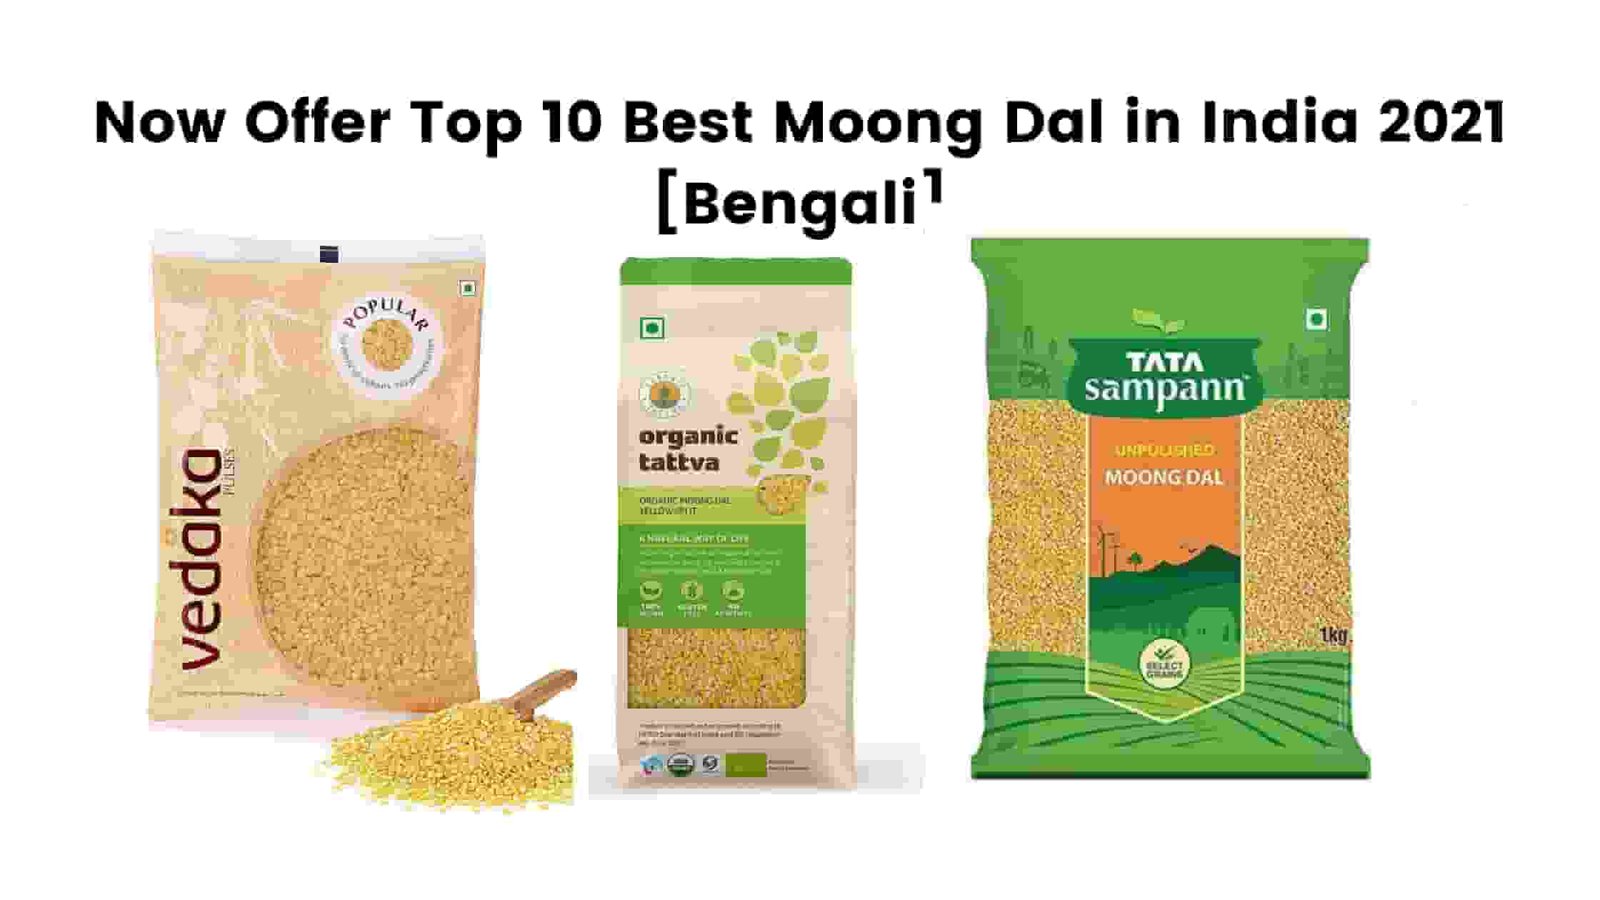 Now Offer Top 10 Best Moong Dal in India 2021 [Bengali]